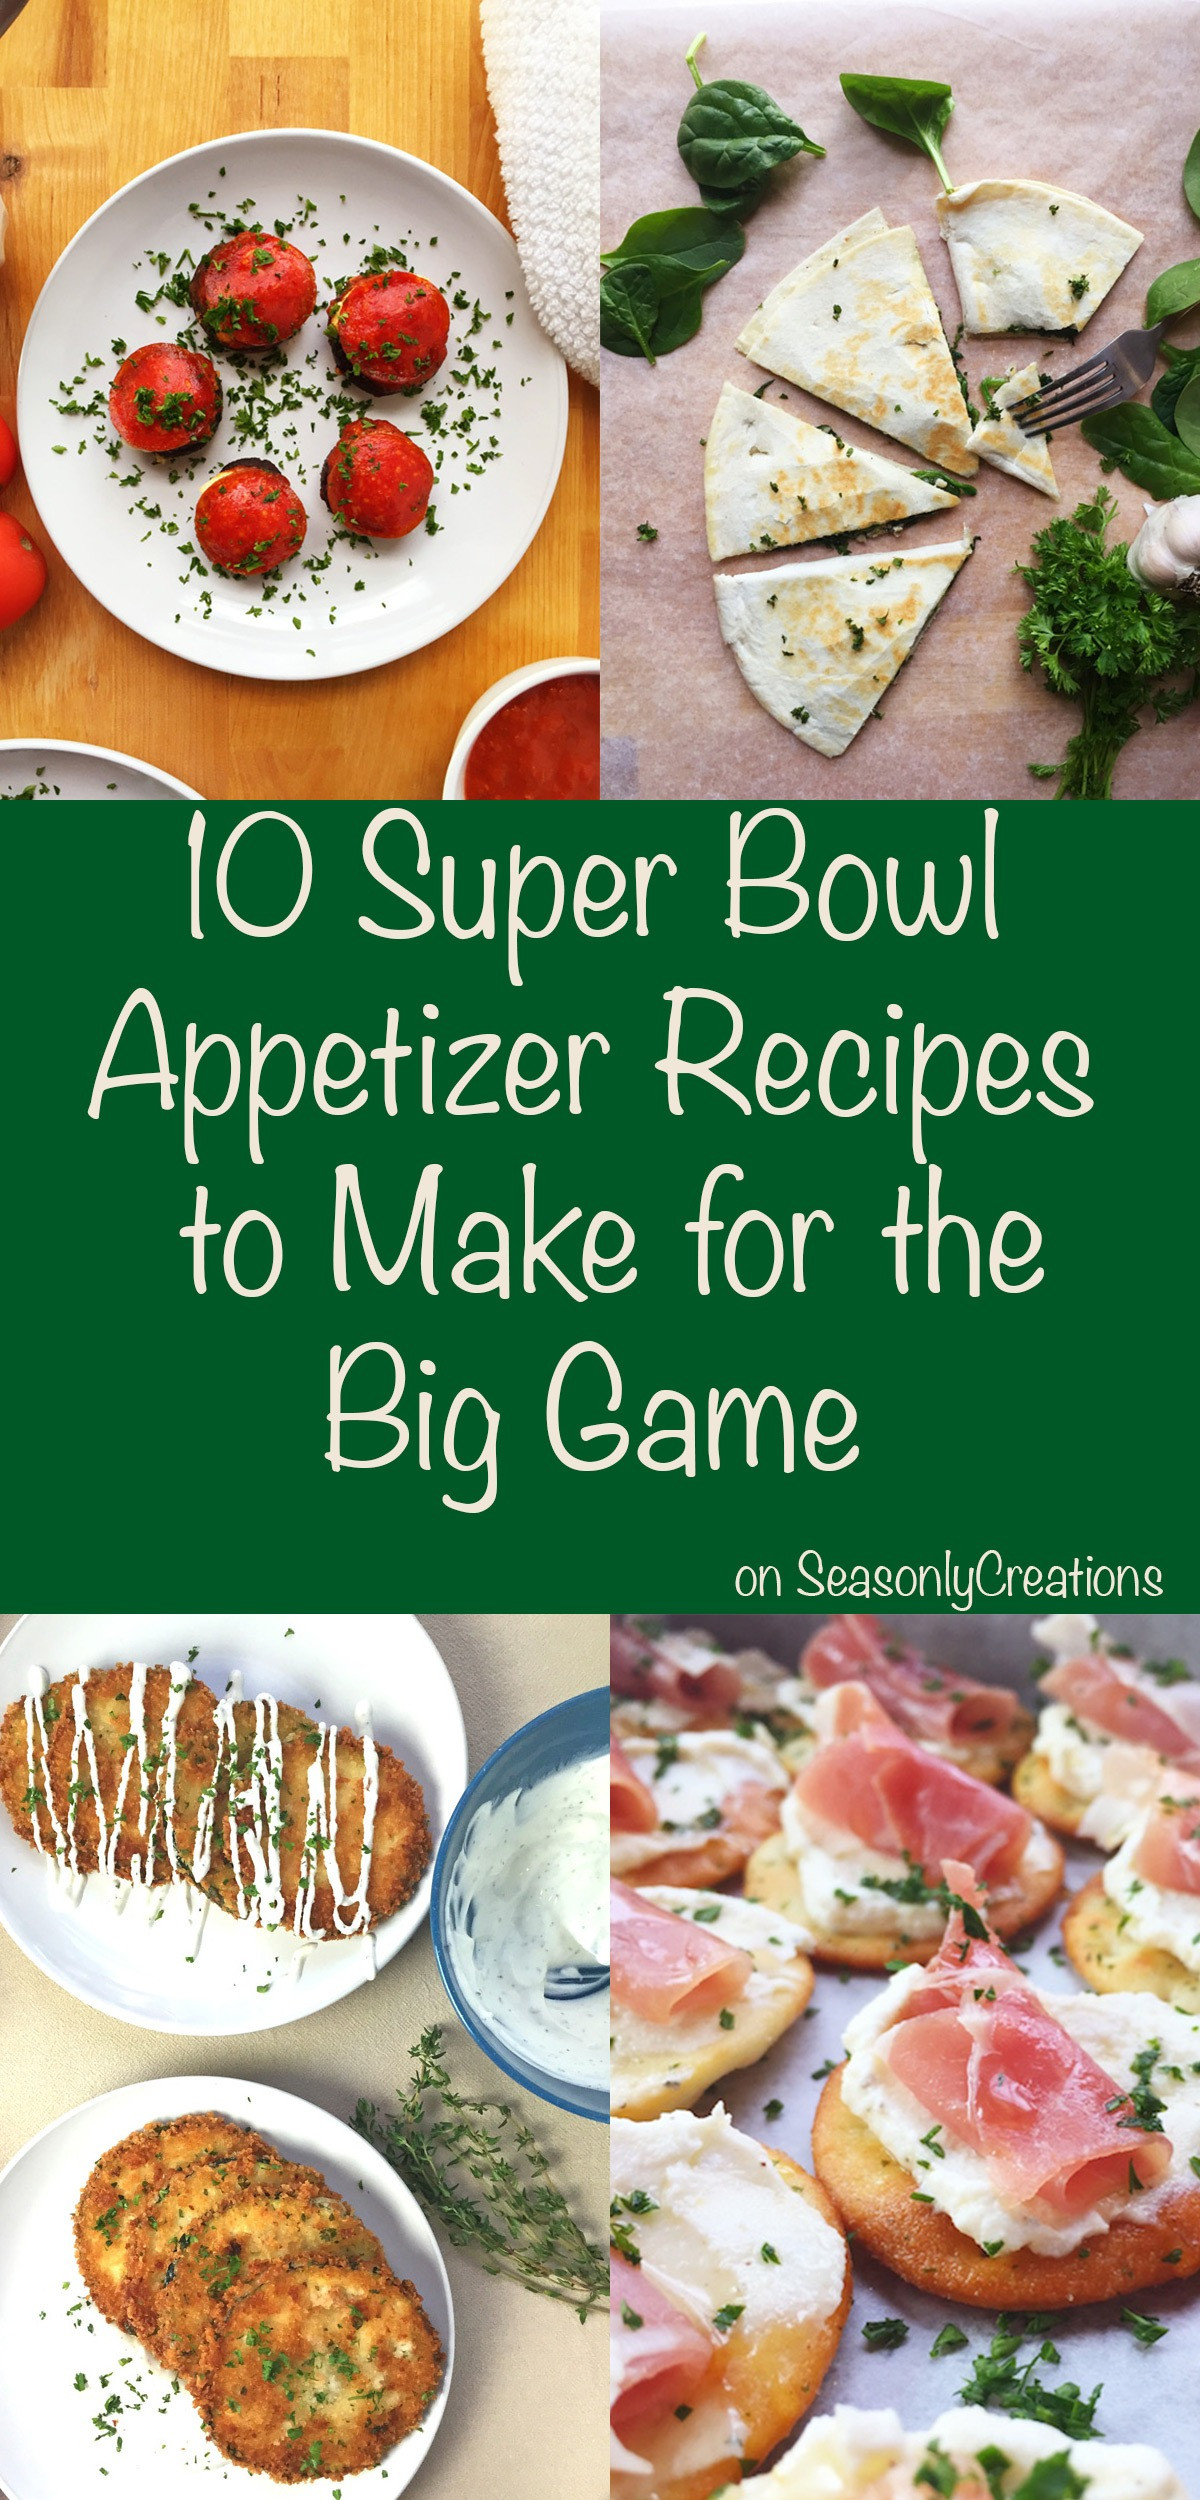 Recipes For The Super Bowl
 10 Super Bowl Appetizer Recipes to Make for the Big Game